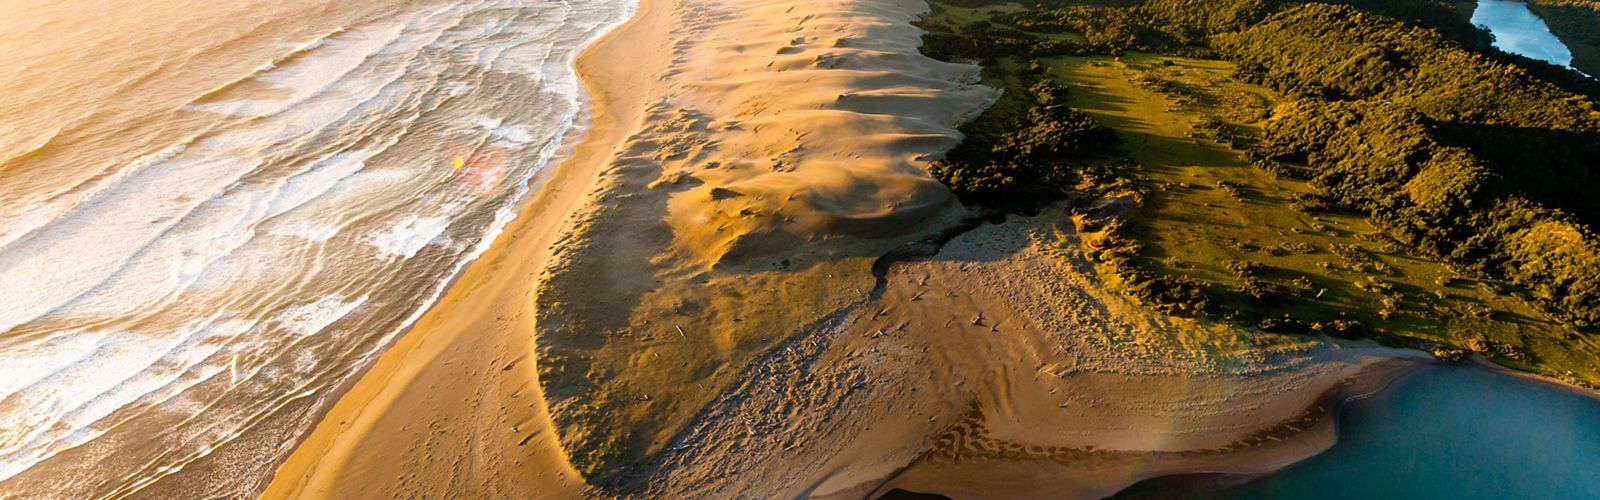 Aerial view of golden sand dunes surrounded by ocean.